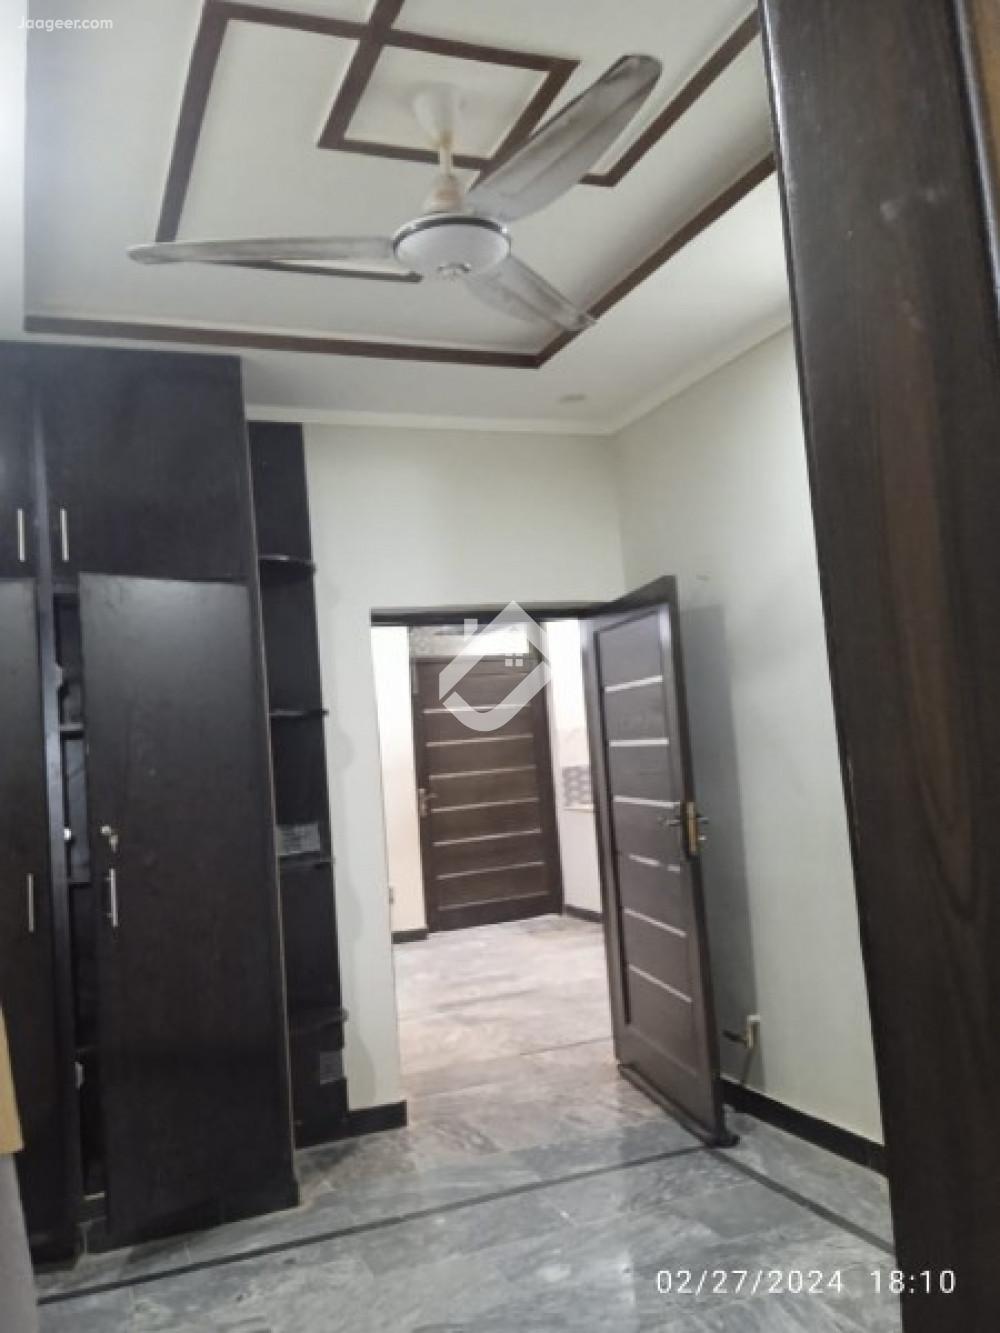 View  5 Marla Upper Portion For Rent In Airport Housing Society Gulzra Quid  Sector 4  in Airport Housing Society, Rawalpindi